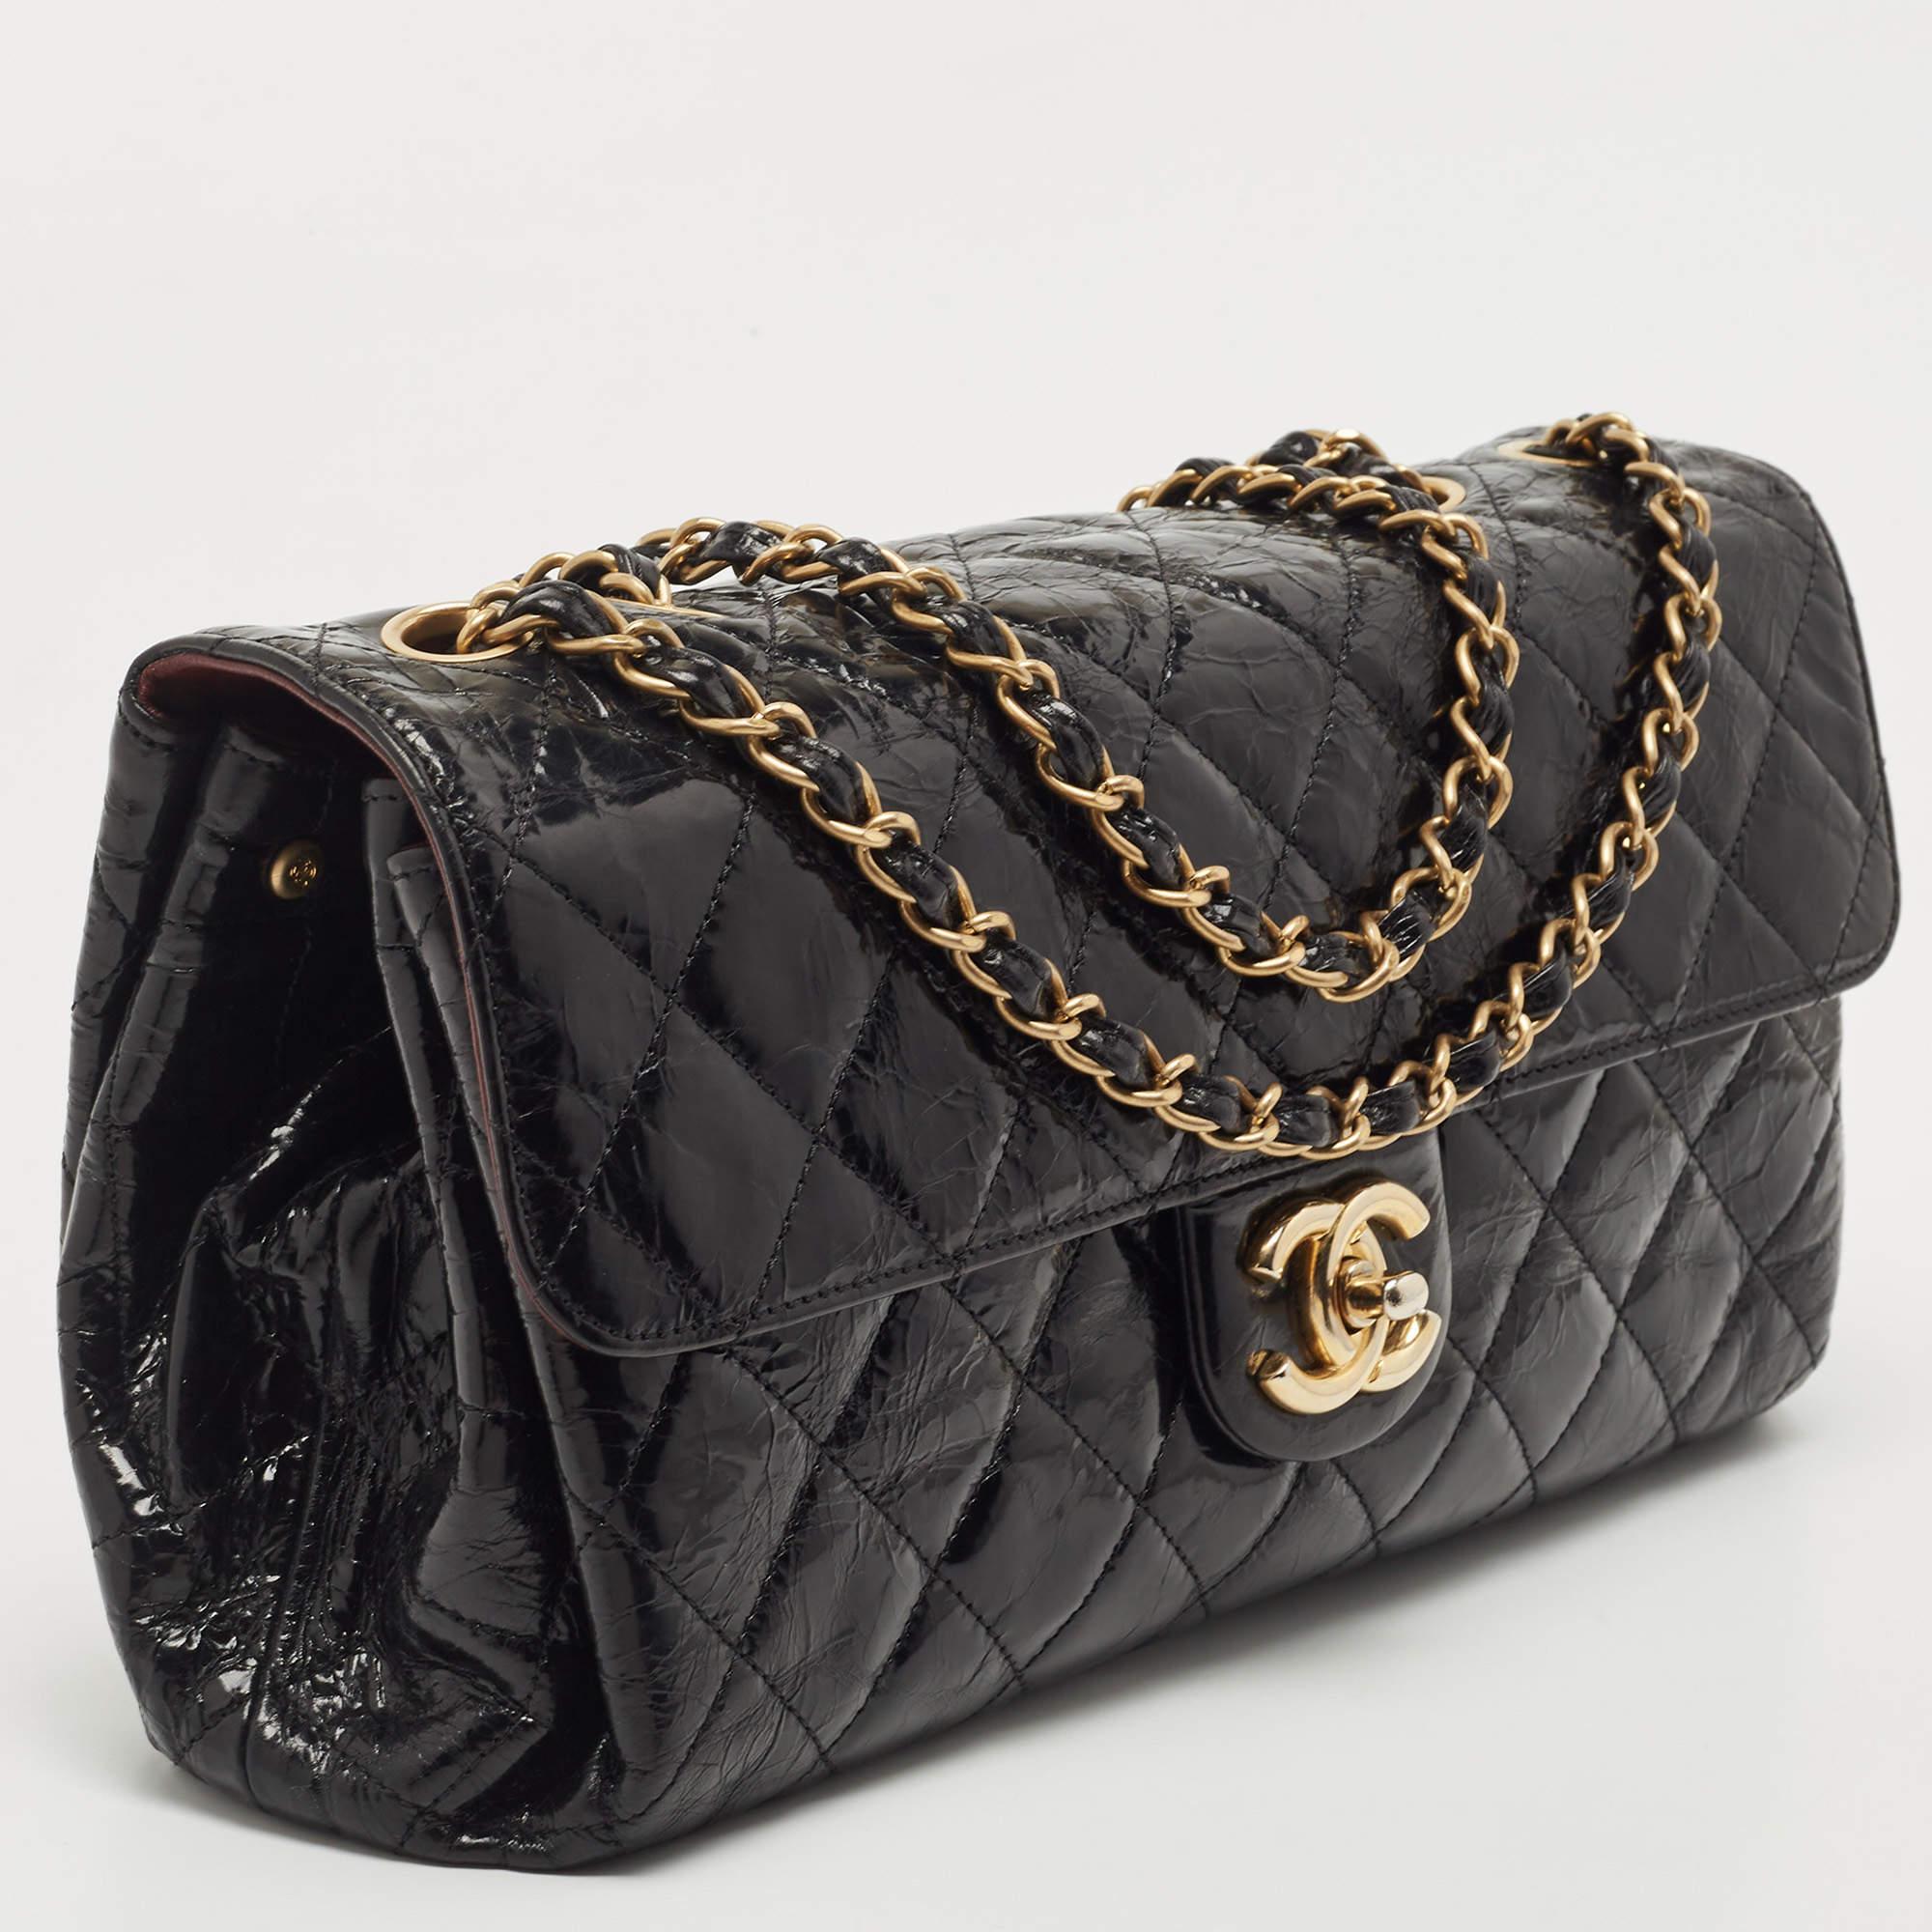 Women's Chanel Black Quilted Leather CC Flap Bag For Sale